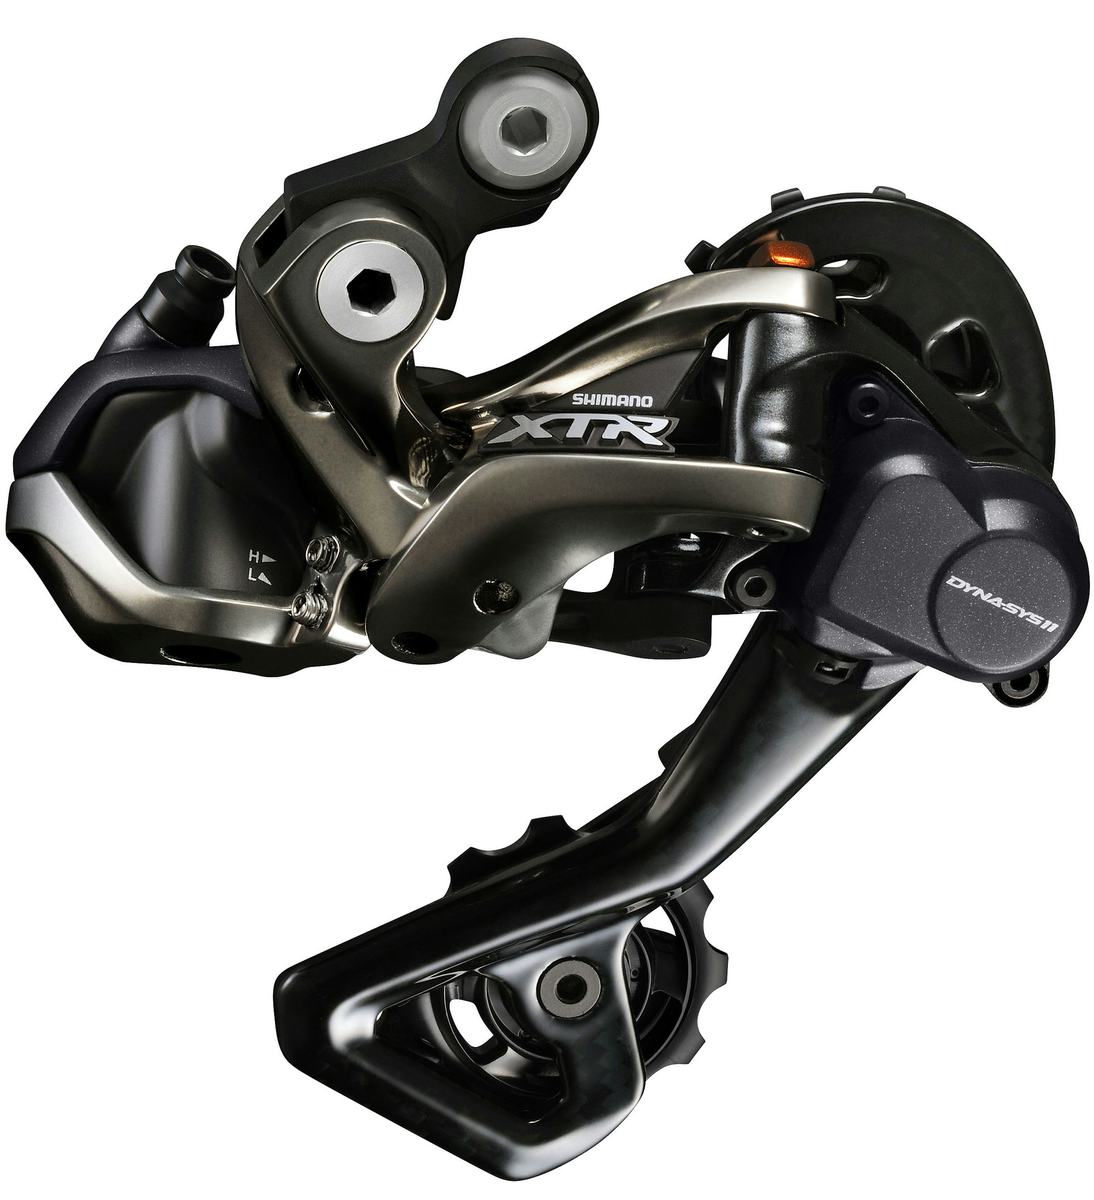 Shimano finally made the step from road-race to MTB with e-shifting. For more images see at the bottom of this page. - Photos Shimano 